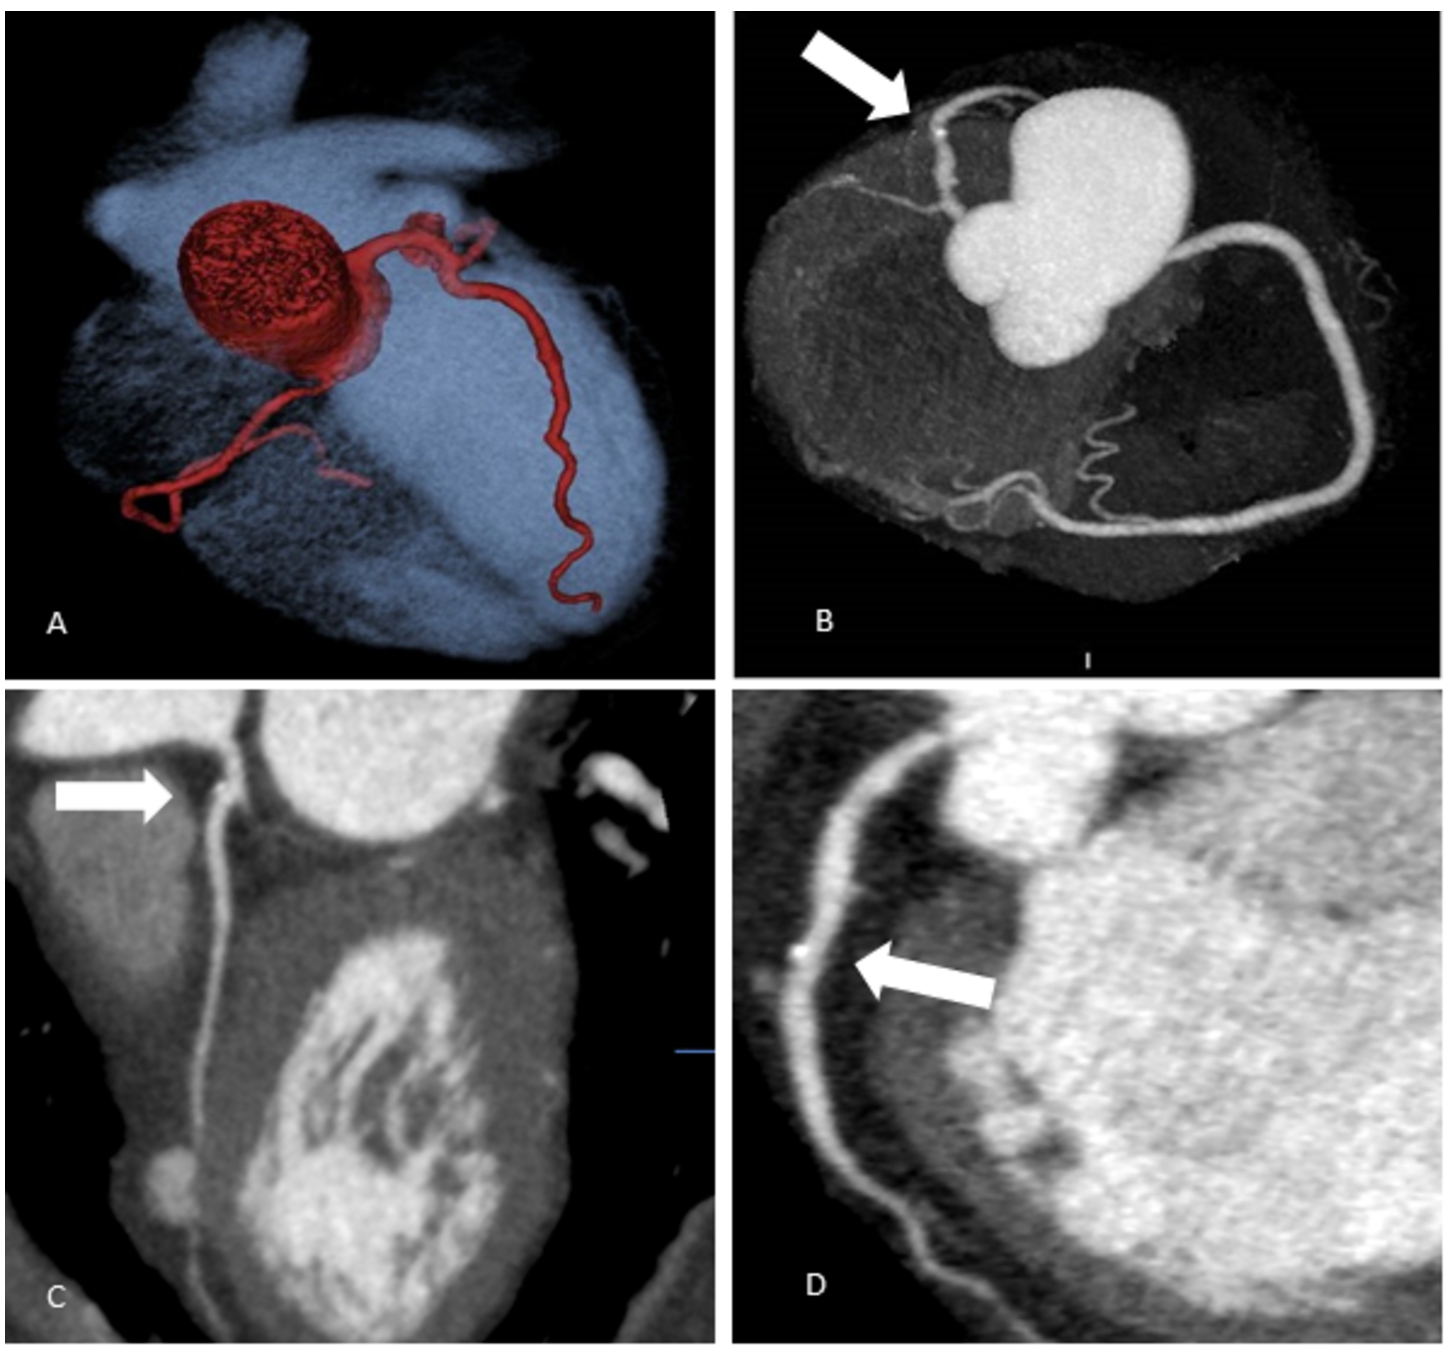 Coronary arteries’ scanning images (Group 1 – overweight patients).A – Coronary arteries’ 3D reconstruction. Patient’s BMI 29.1 kg/m2; 80-kV, effective dose 1.2 mSv.B – Coronary arteries’ 3D reconstruction. Patient’s BMI 25.1 kg/m2; 80-kV, effective dose 0.95 mSv; calcified plaque in LAD S6 (labelled by white arrow).C – Multiplanar curved reconstruction of LAD coronary artery. LAD S6 mixed plaque, 20% stenosis (labelled by white arrow). Patient’s BMI 28.2 kg/m2, 100-kV.D – Multiplanar curved reconstruction of LAD coronary artery. LAD S7 calcified plaque, 25% stenosis (labelled by white arrow). Patient’s BMI 25.1 kg/m2, 80-kV.